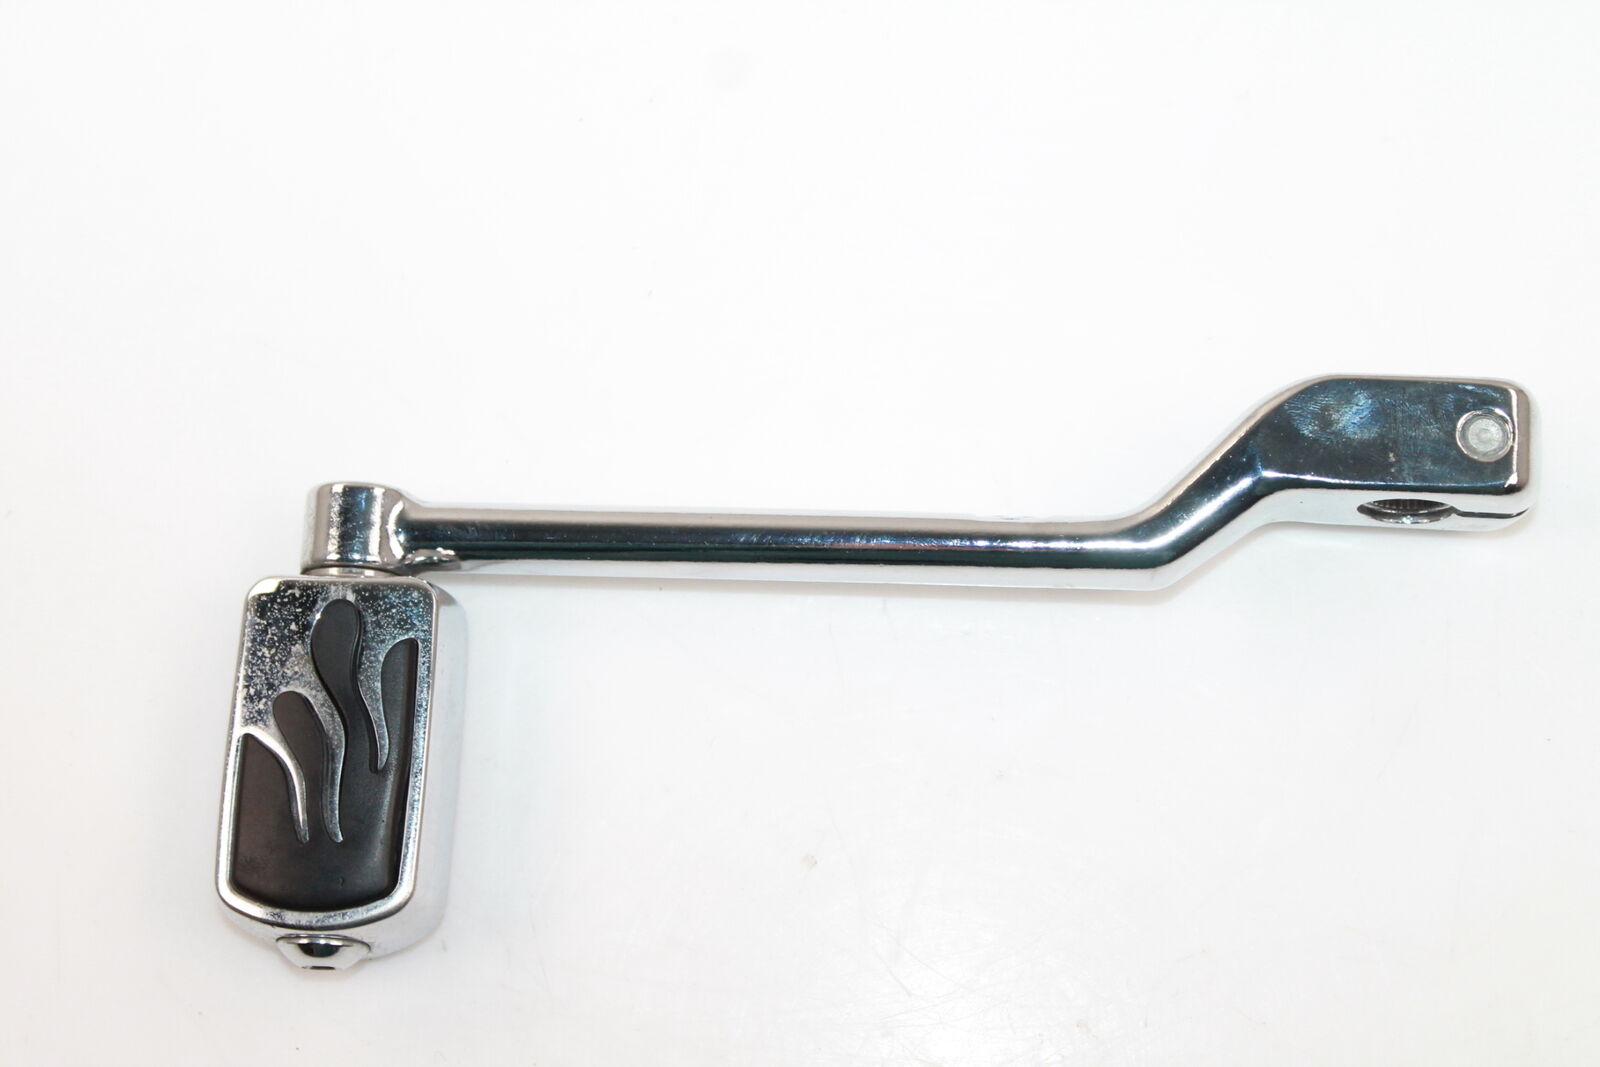 Harley Road King Classic Flhrci 2005 Shifter Pedal